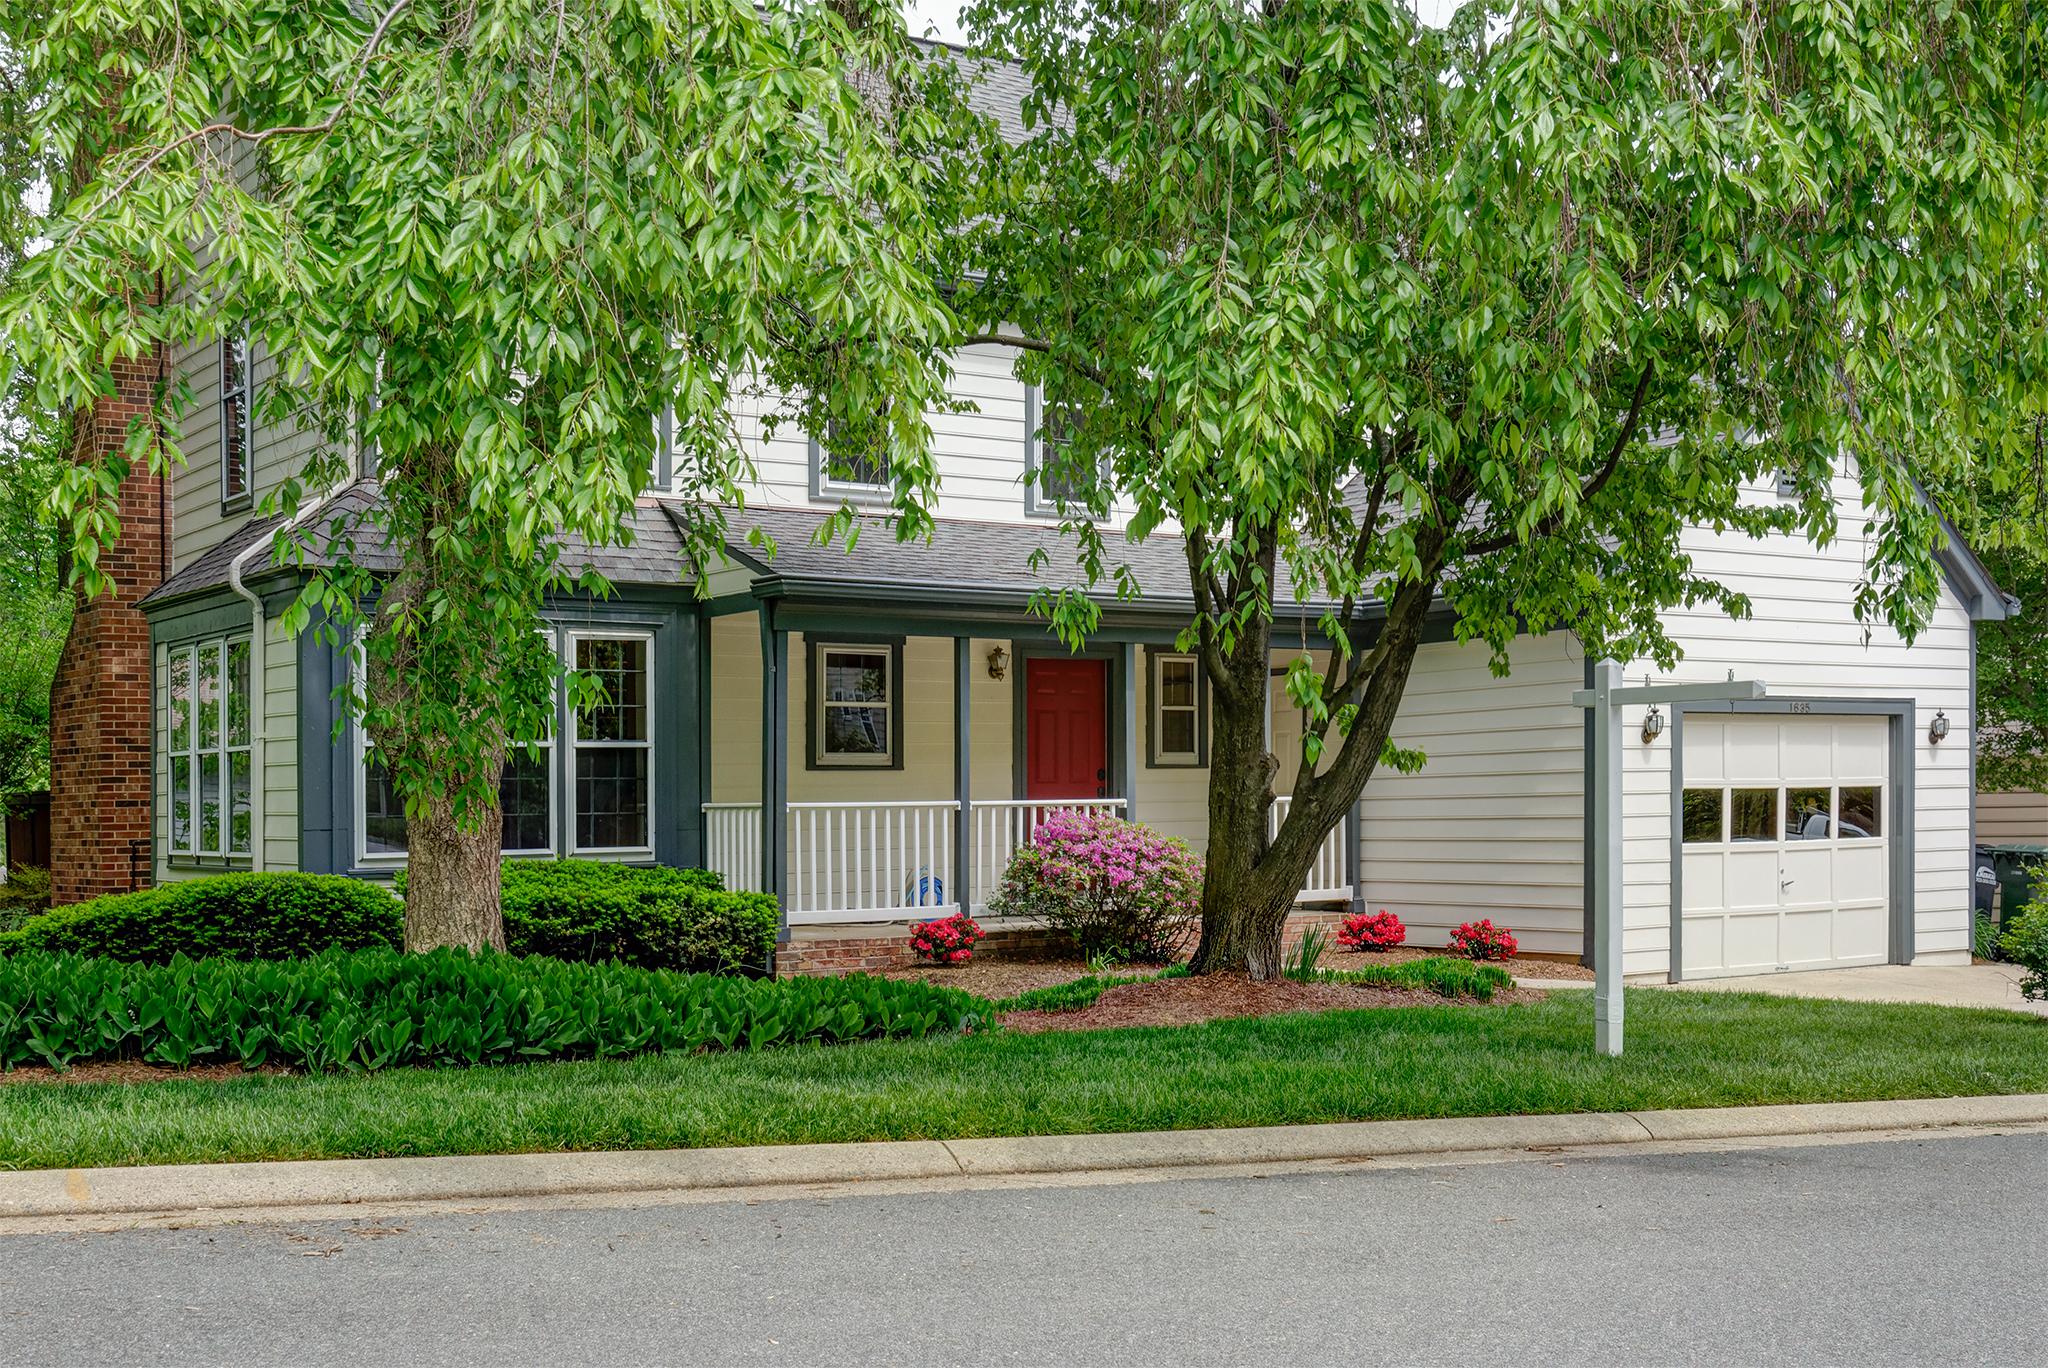 Located minutes from Reston Town Center and a number of great grocery stores, this lovely home is update and ready to go! for more information: 1635stowe.com,  $699,000, FX8635570 Listed by Momentum Realty, Potomac Falls, VA 